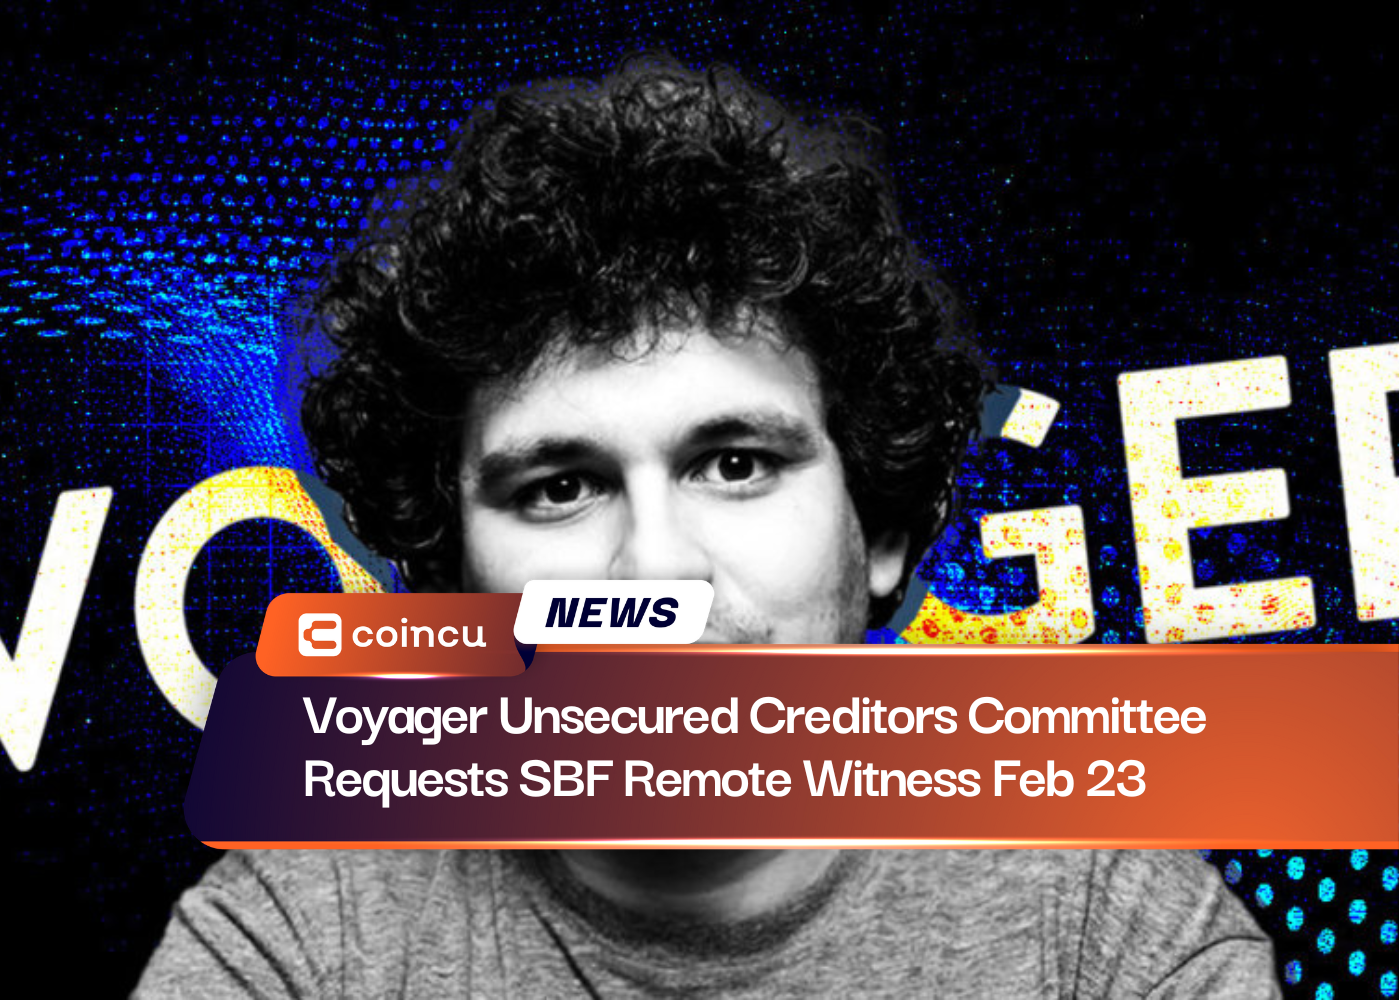 Voyager Unsecured Creditors Committee Requests SBF Remote Witness Feb 23